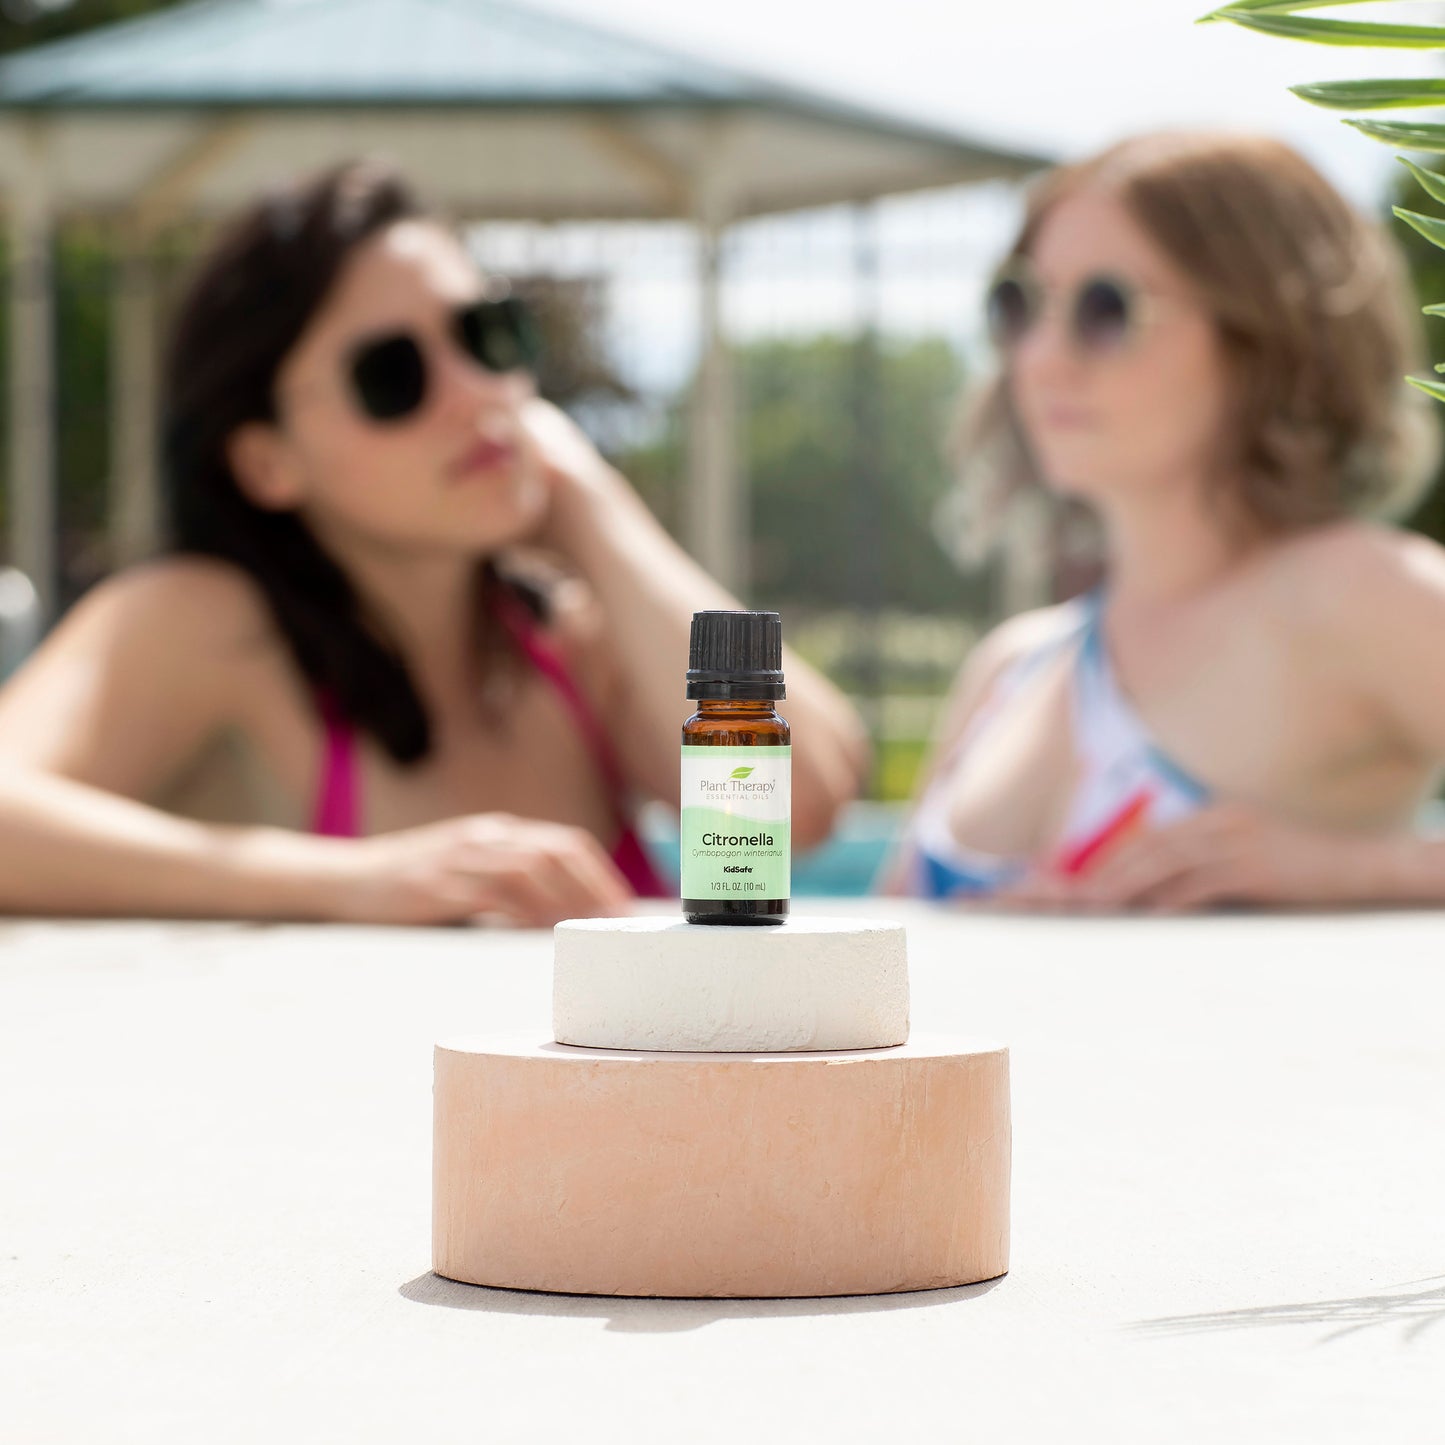 Citronella Essential Oil pictured next to the pool